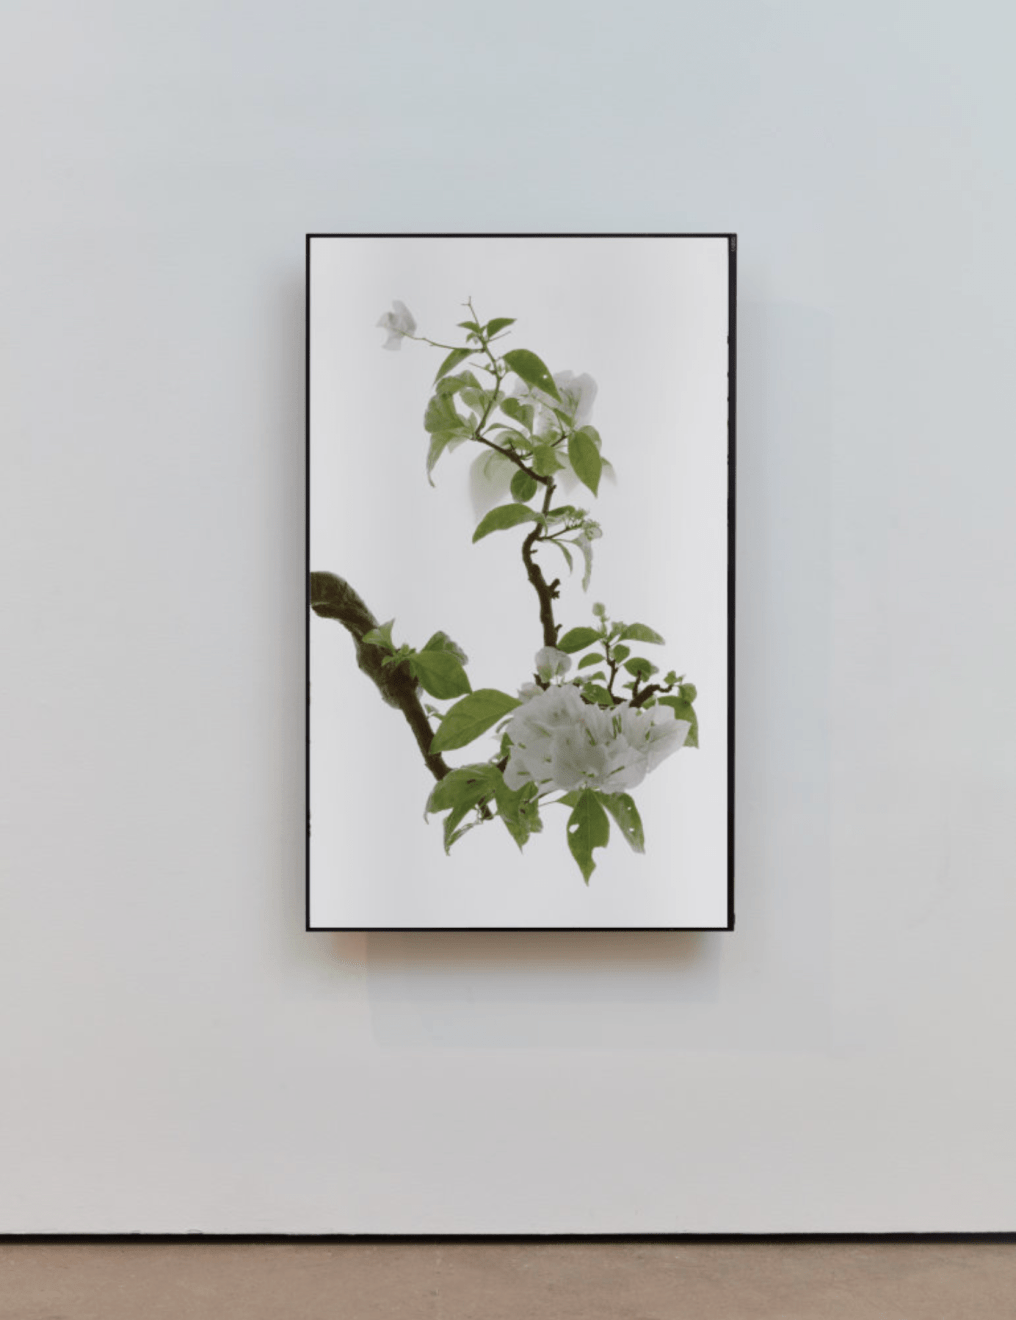 Wu Chi-Tsung Still Life 013 - Bougainvillea, 2020 the work is accompanied by a signed certificate of authenticity single-channel video, 6 min 55 sec edition of 5 with 2 APs (#2/5) (WCT-20.2)